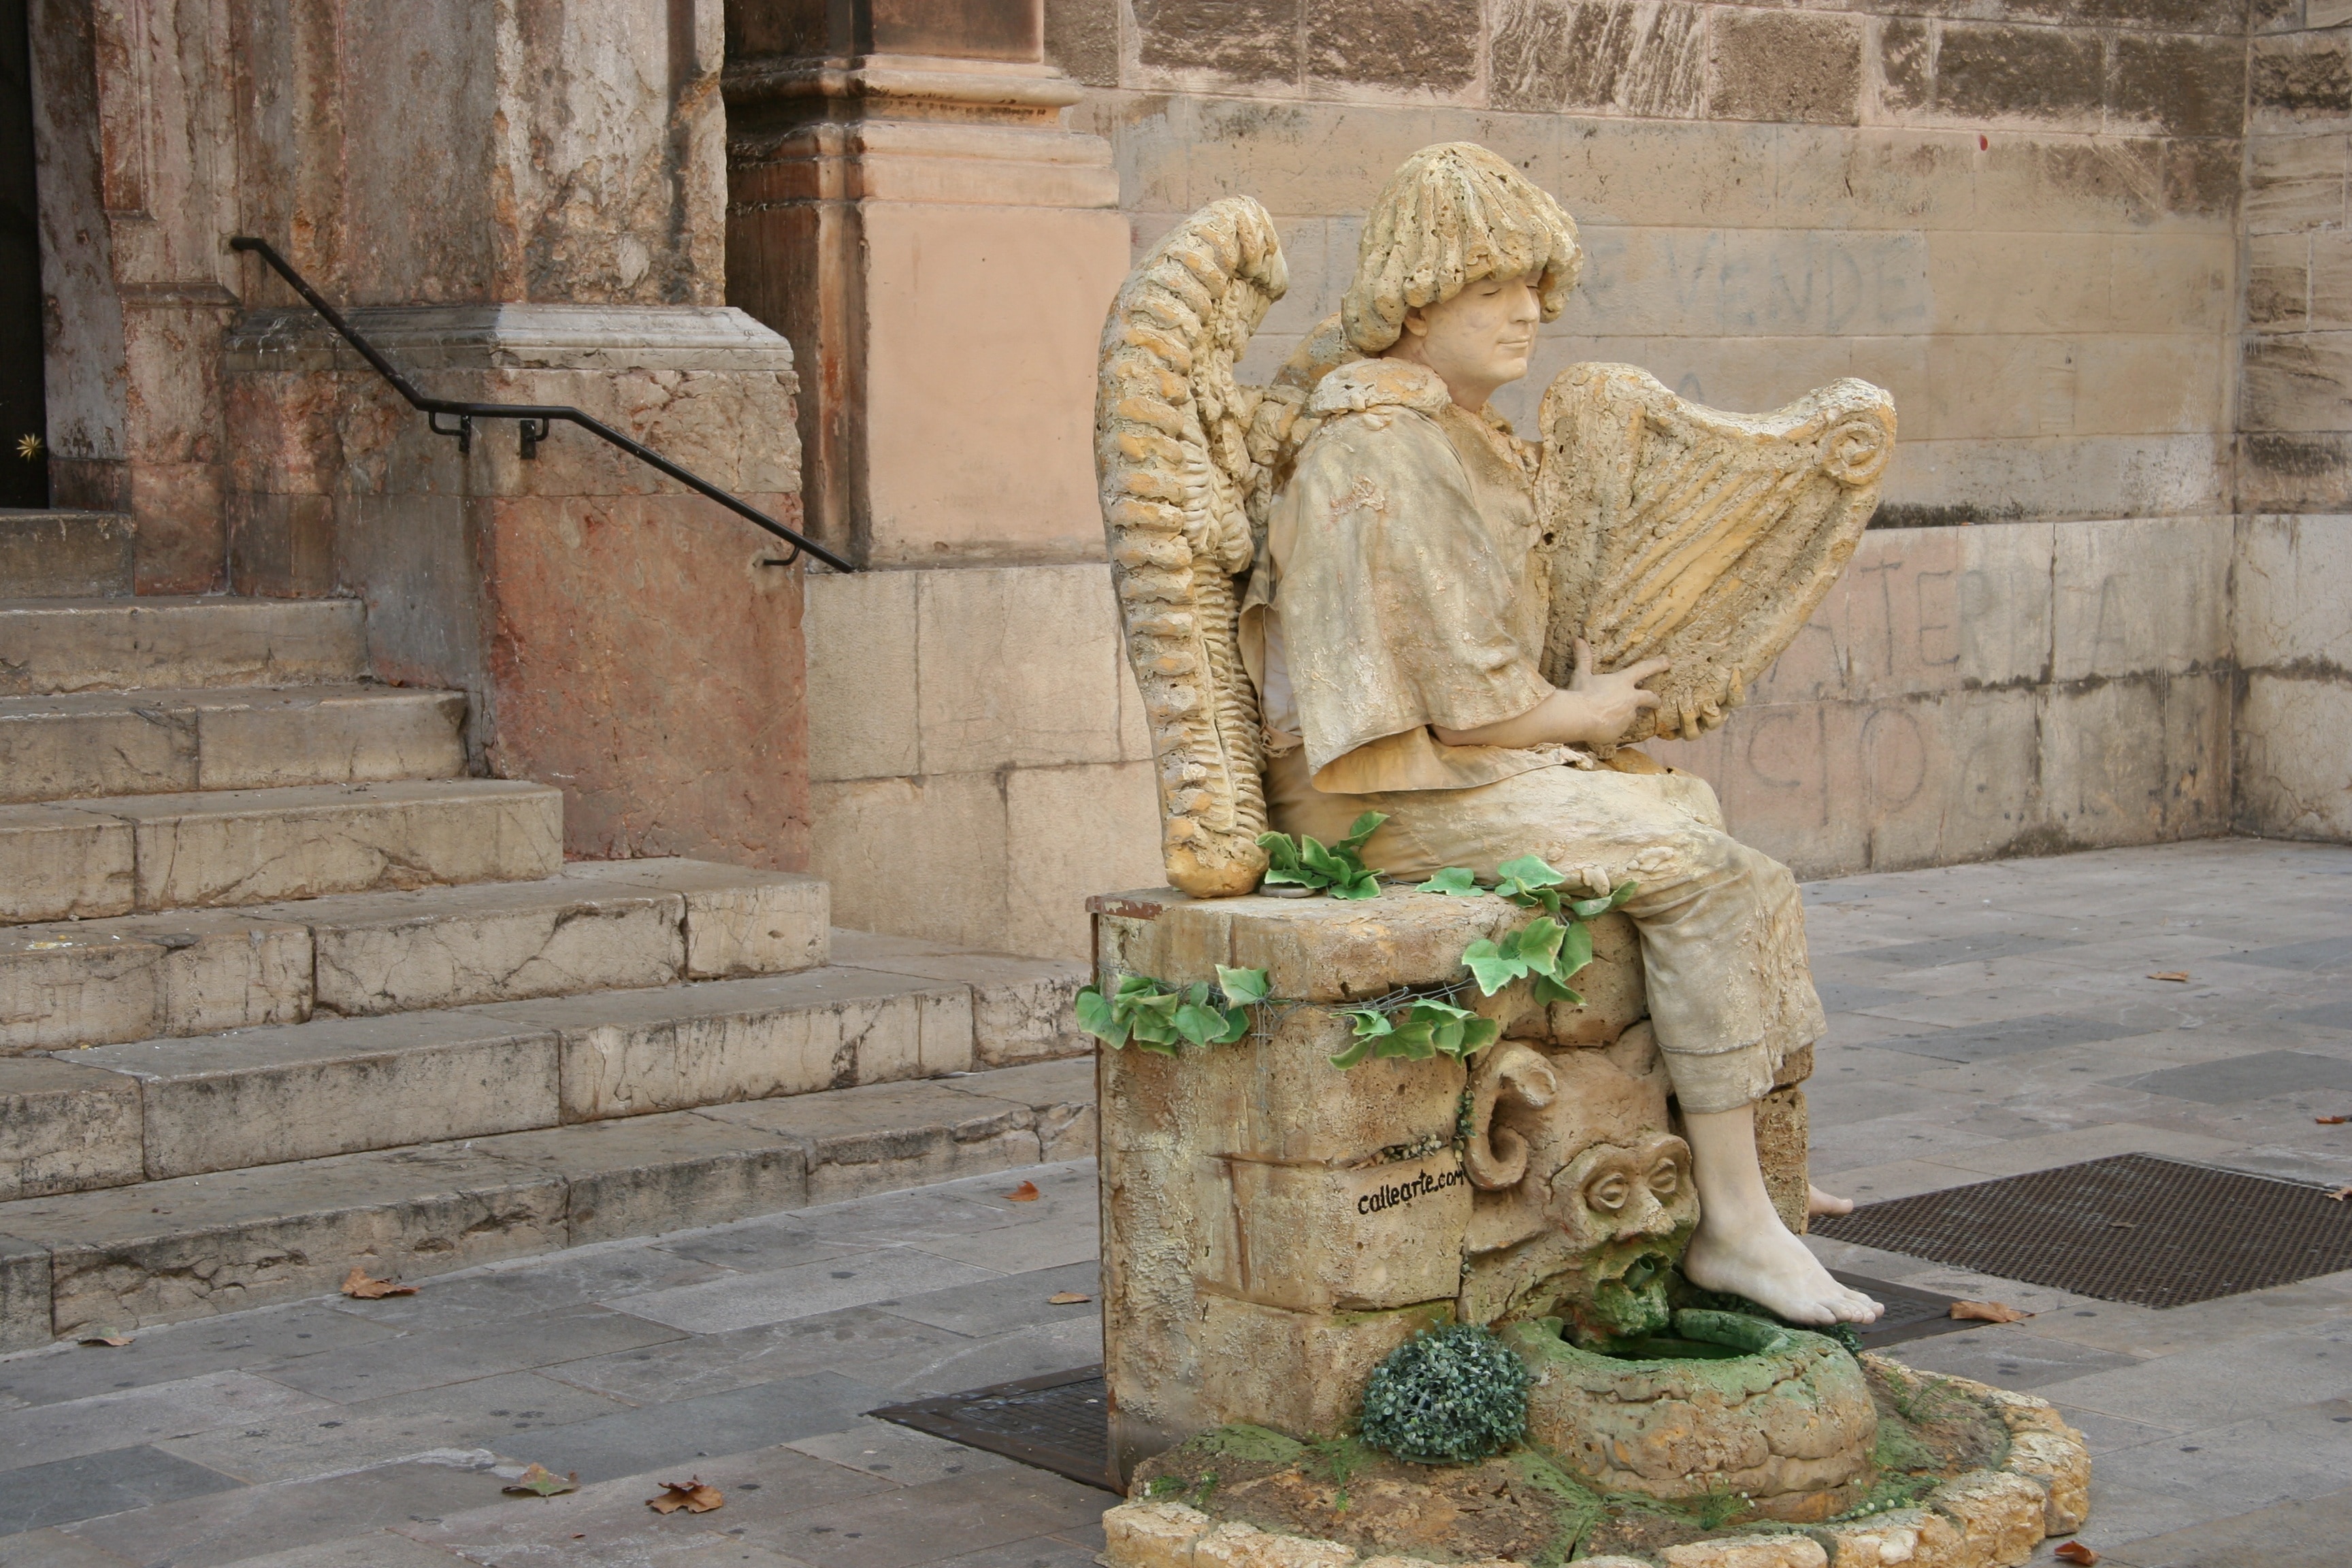 person playing harp sitting on chair figurine